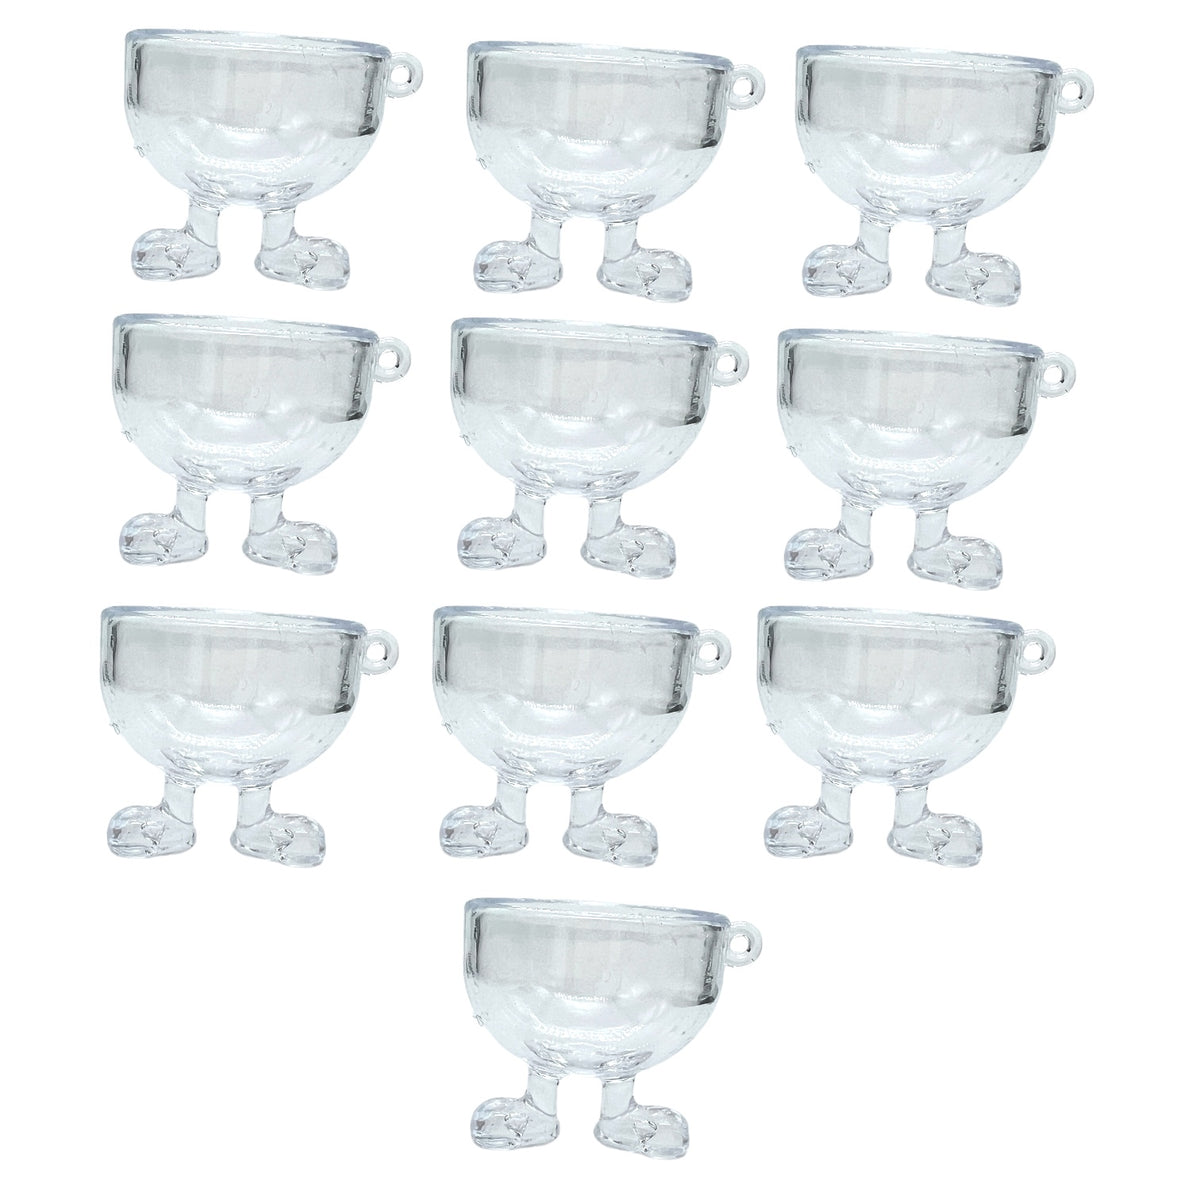 10-pack Mini Cup With Feet Keychain Blanks